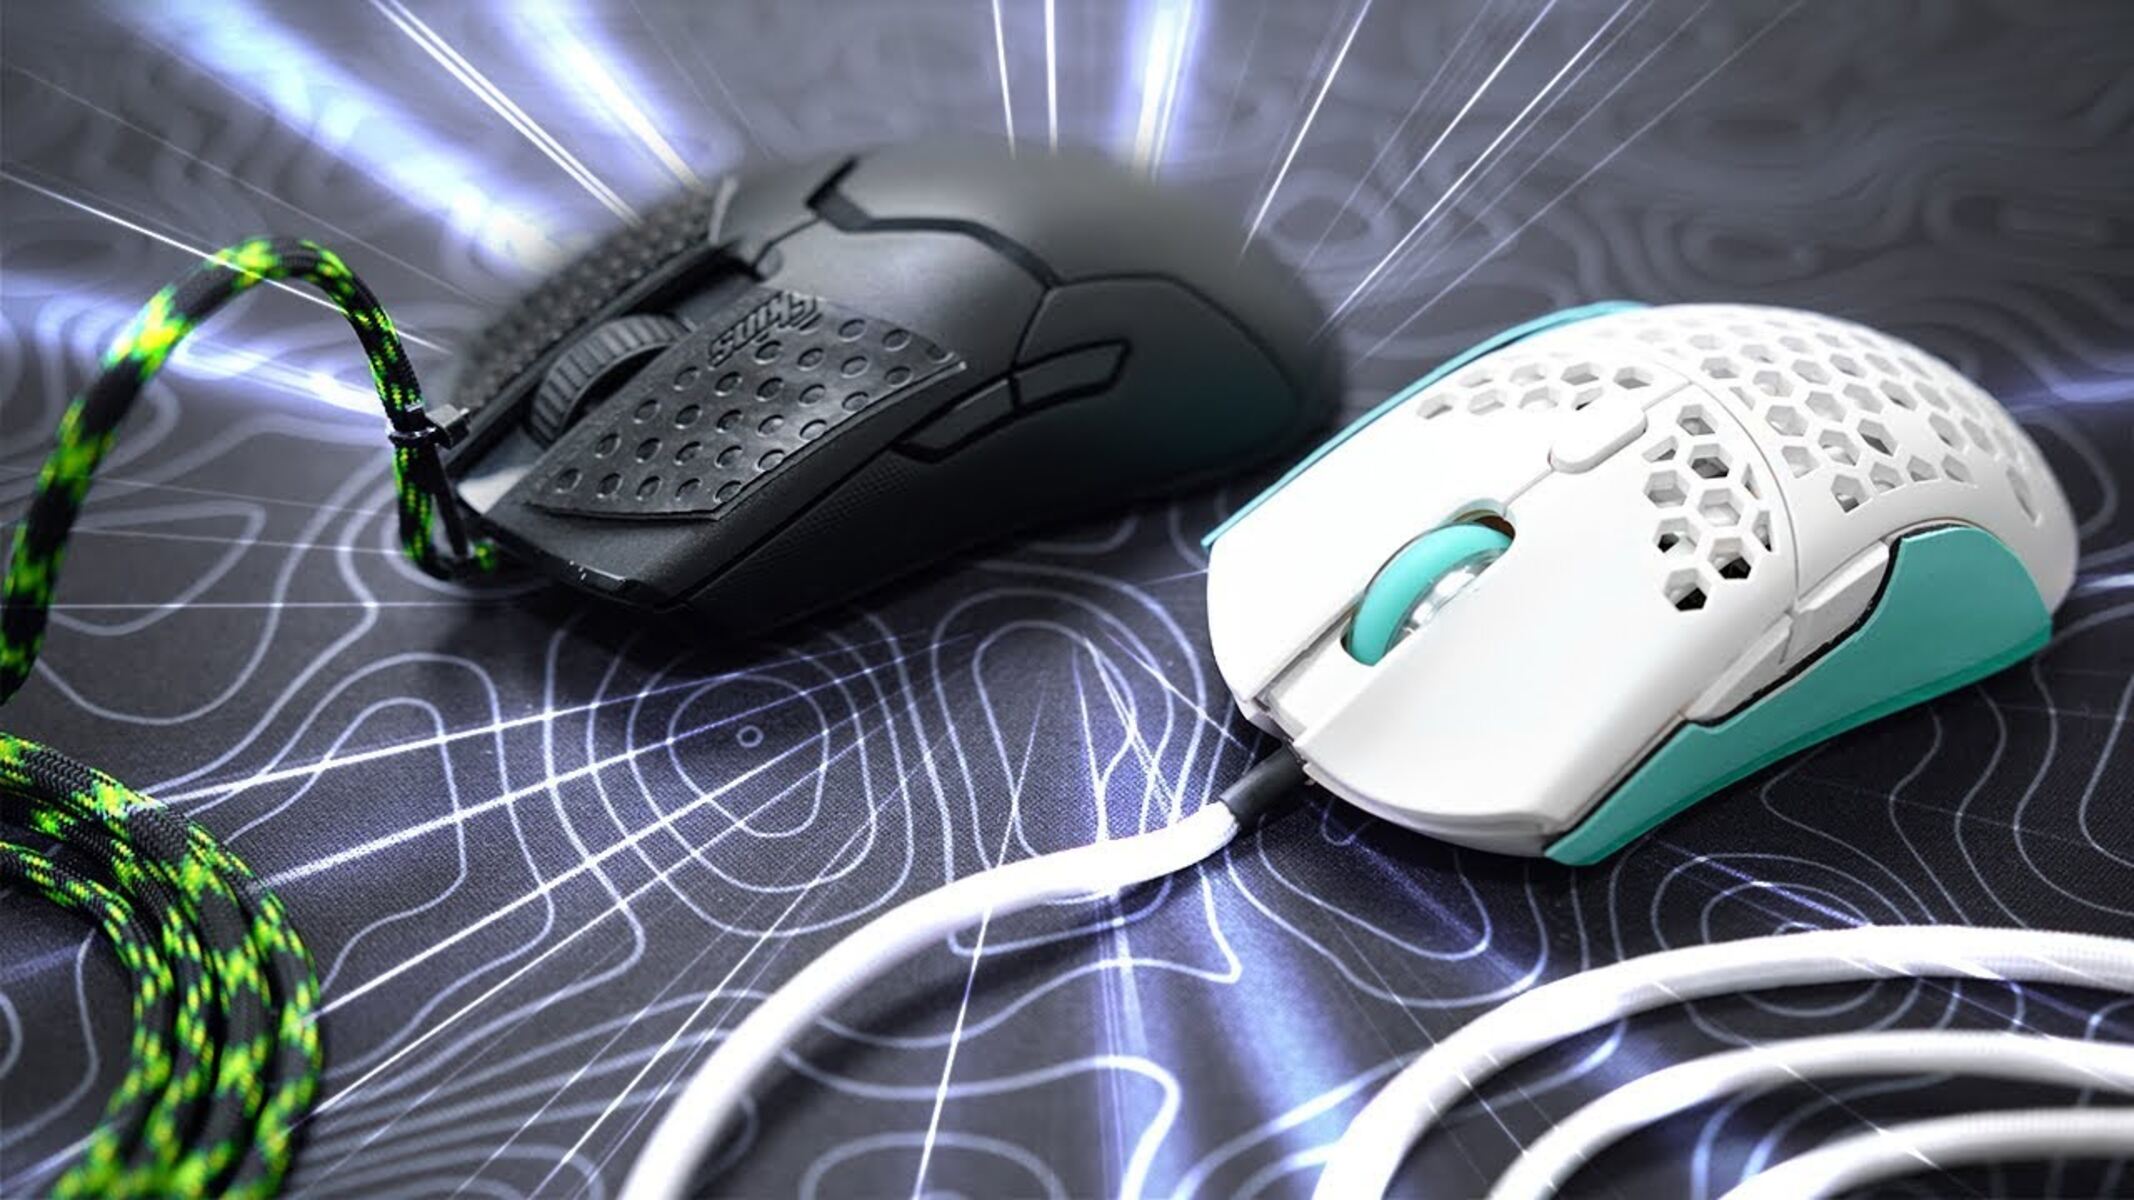 How To Customise Tecknet M288 Gaming Mouse